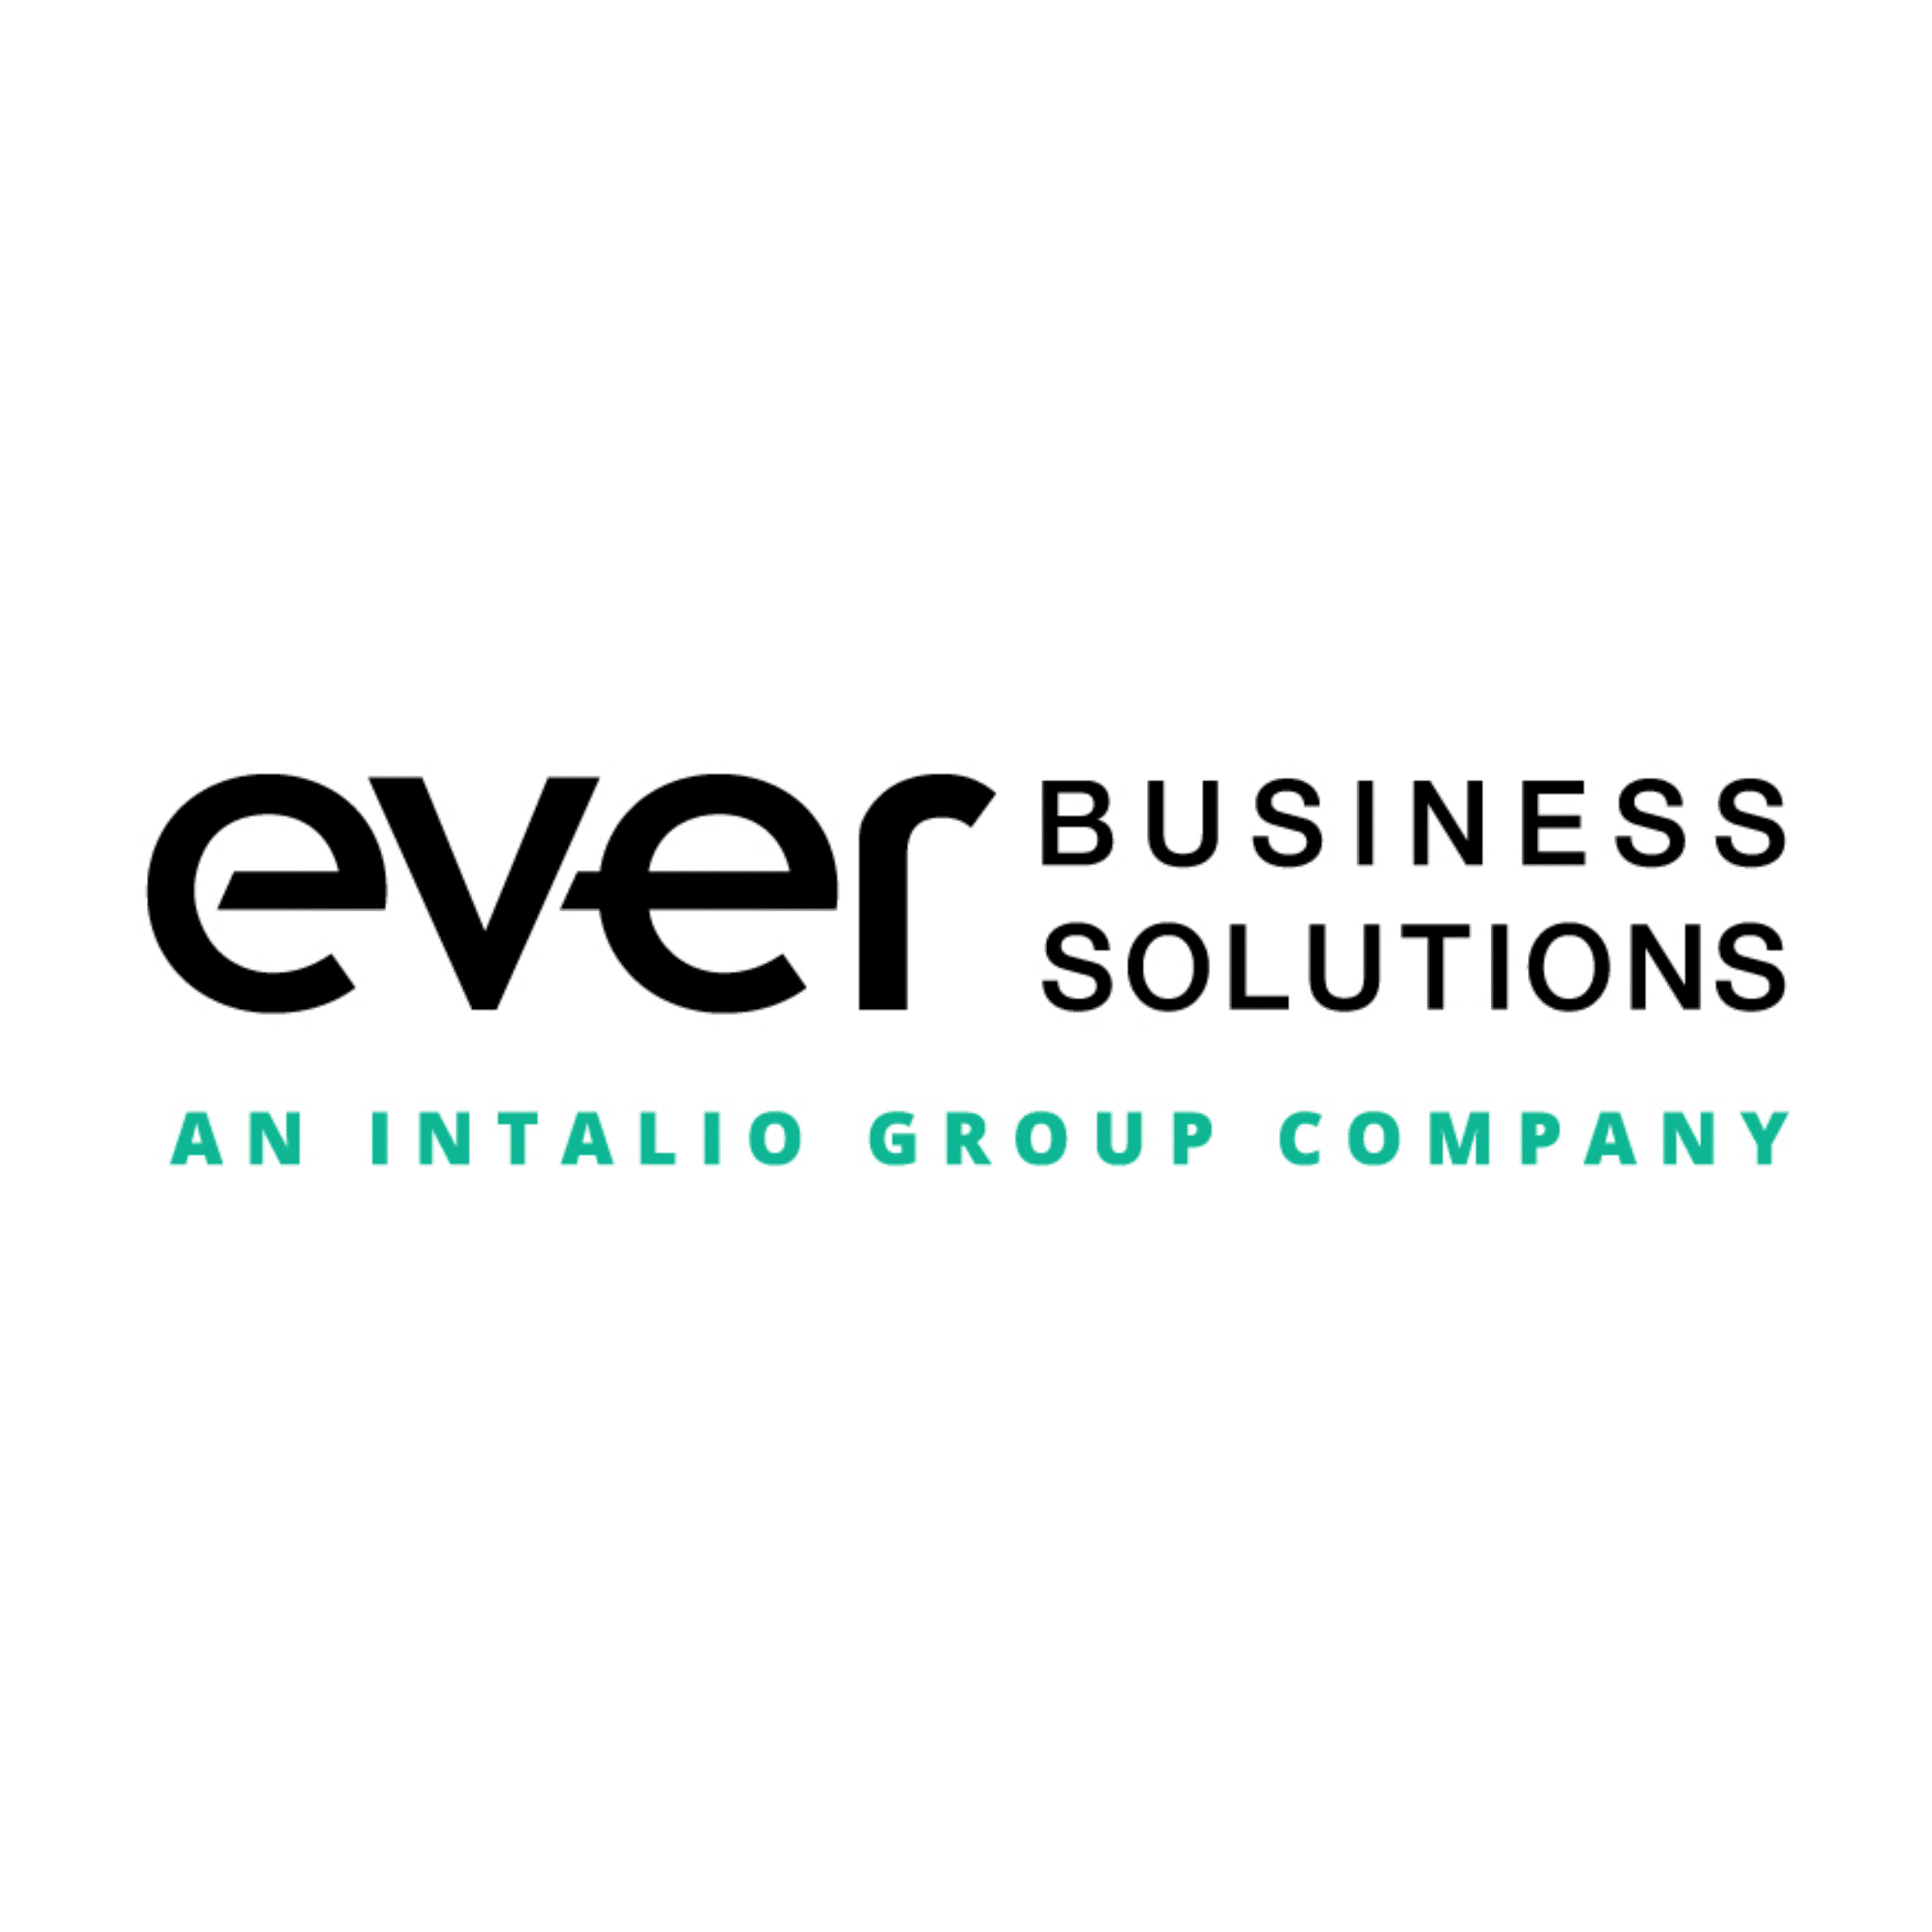 Ever Business Solutions